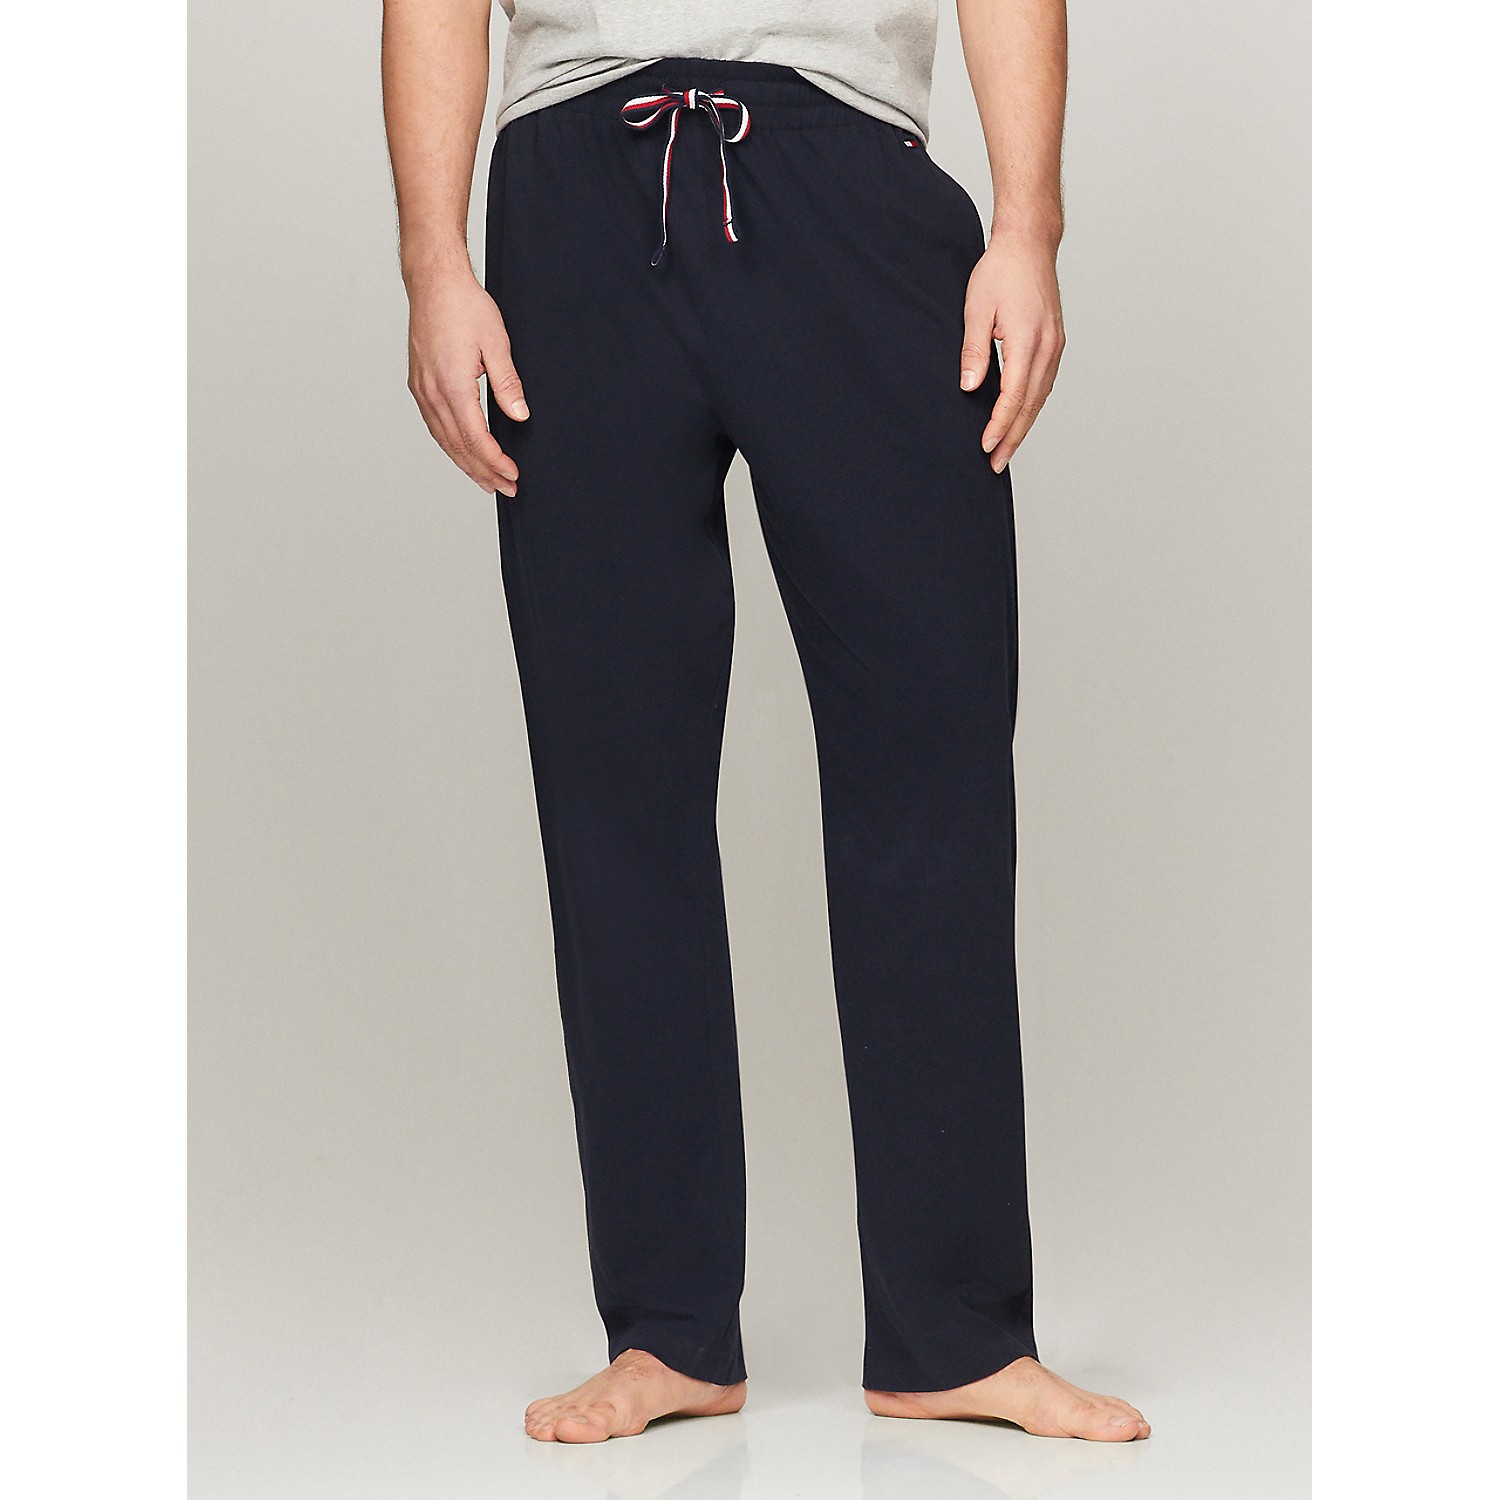 TOMMY HILFIGER Sueded Jersey Sleep Pant